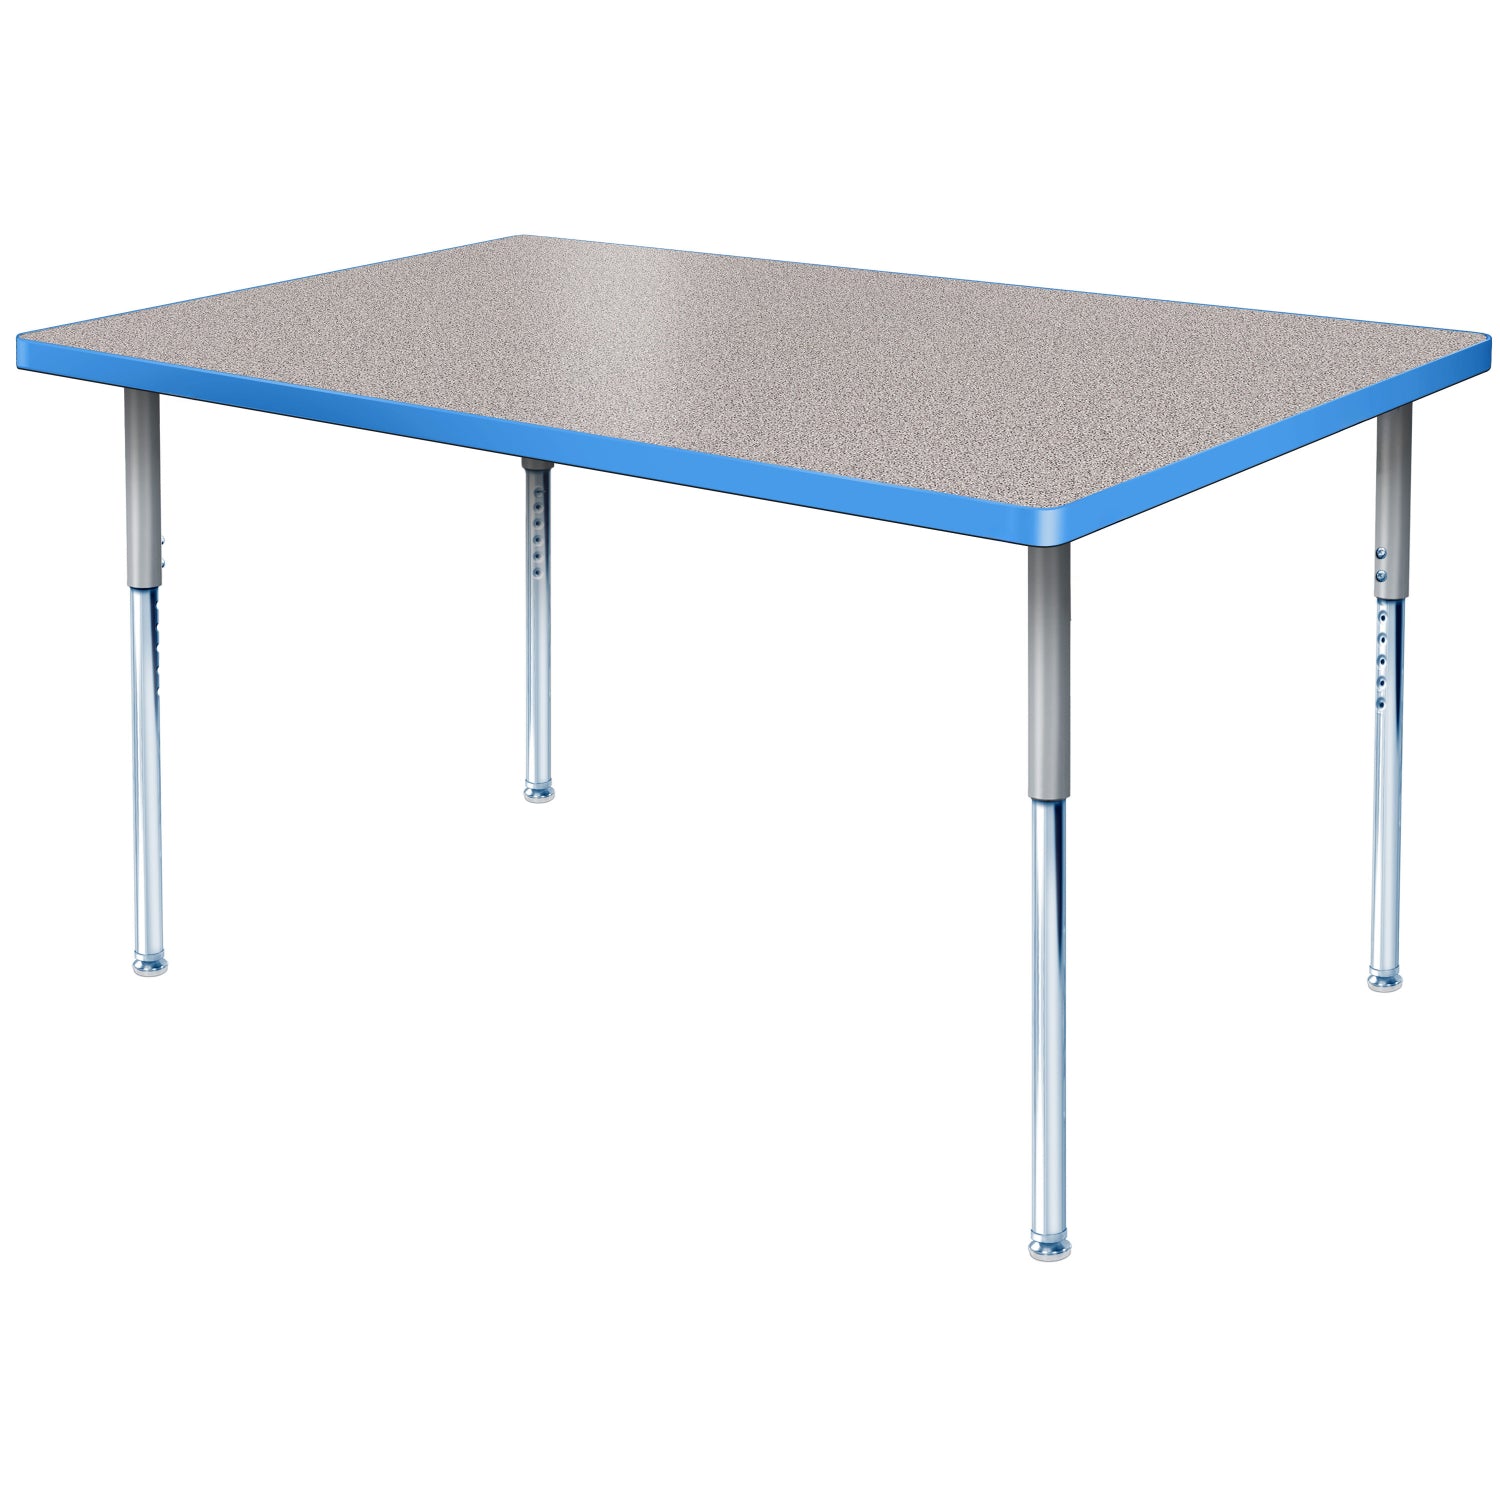 Modern Classic Series 24 x 60" Rectangular Activity Table with High Pressure Laminate Top, Adjustable Height Legs